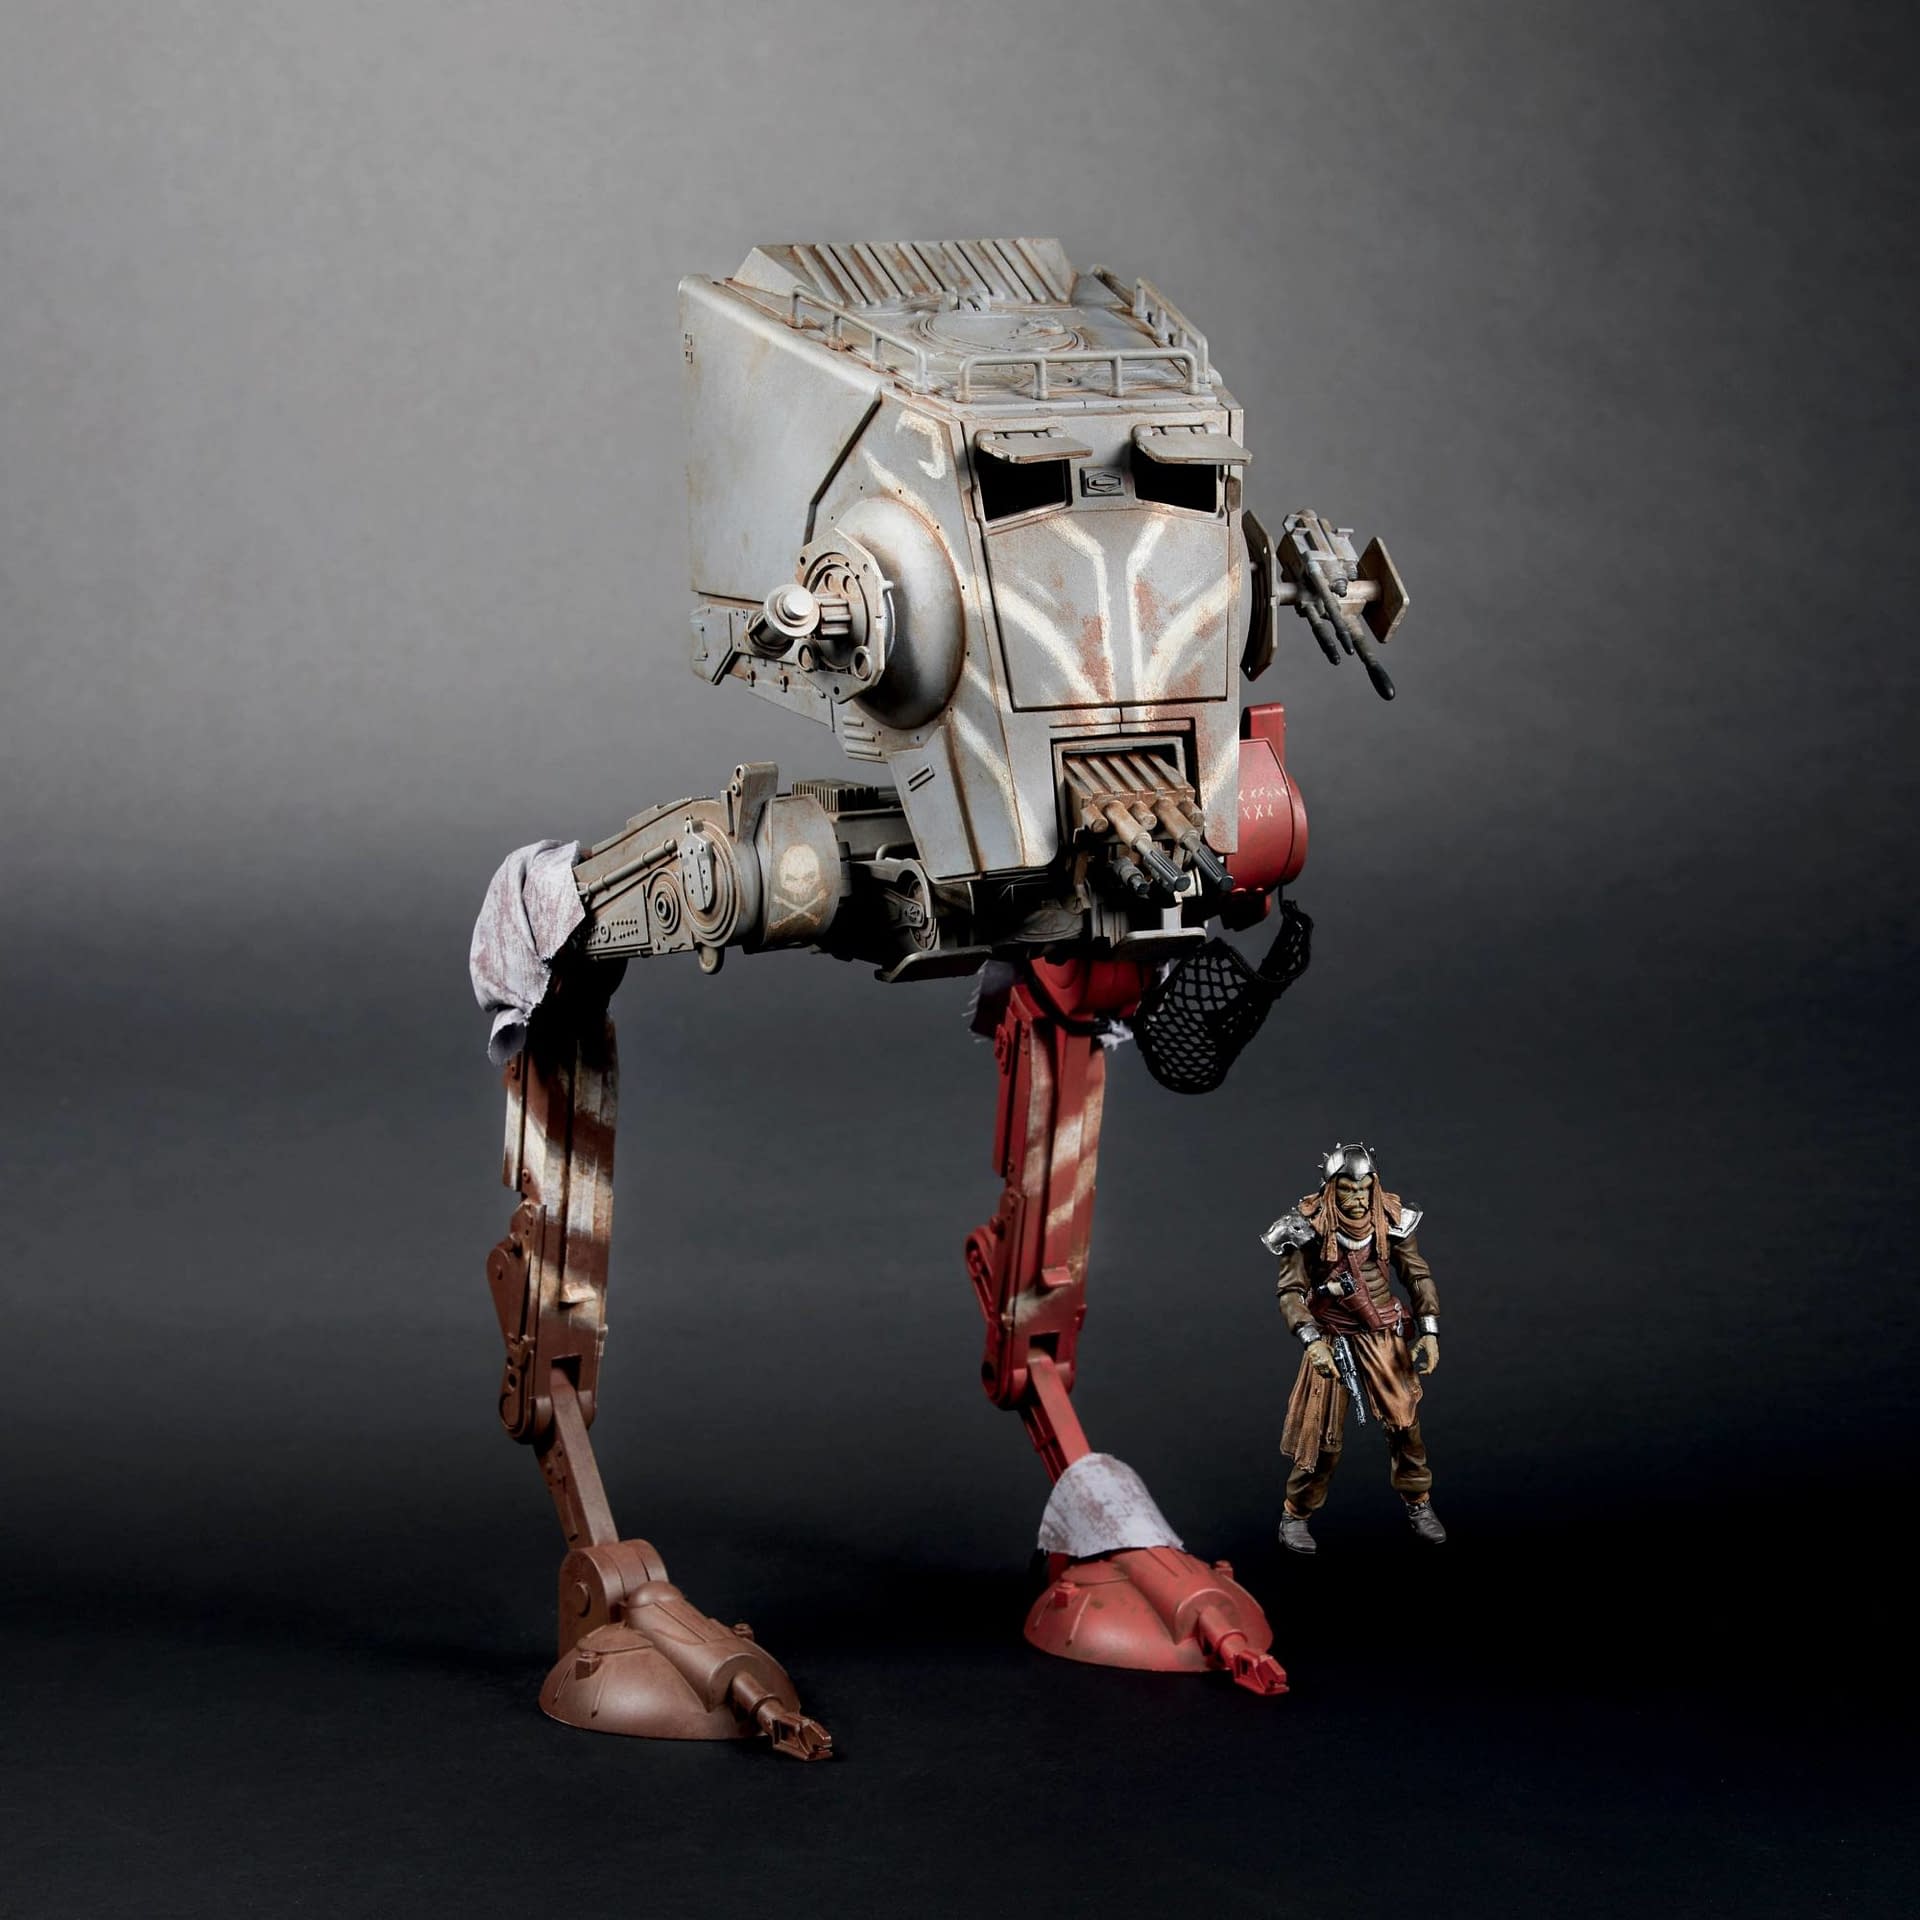 New Star Wars Vehicles Are Getting the Vintage Treatment